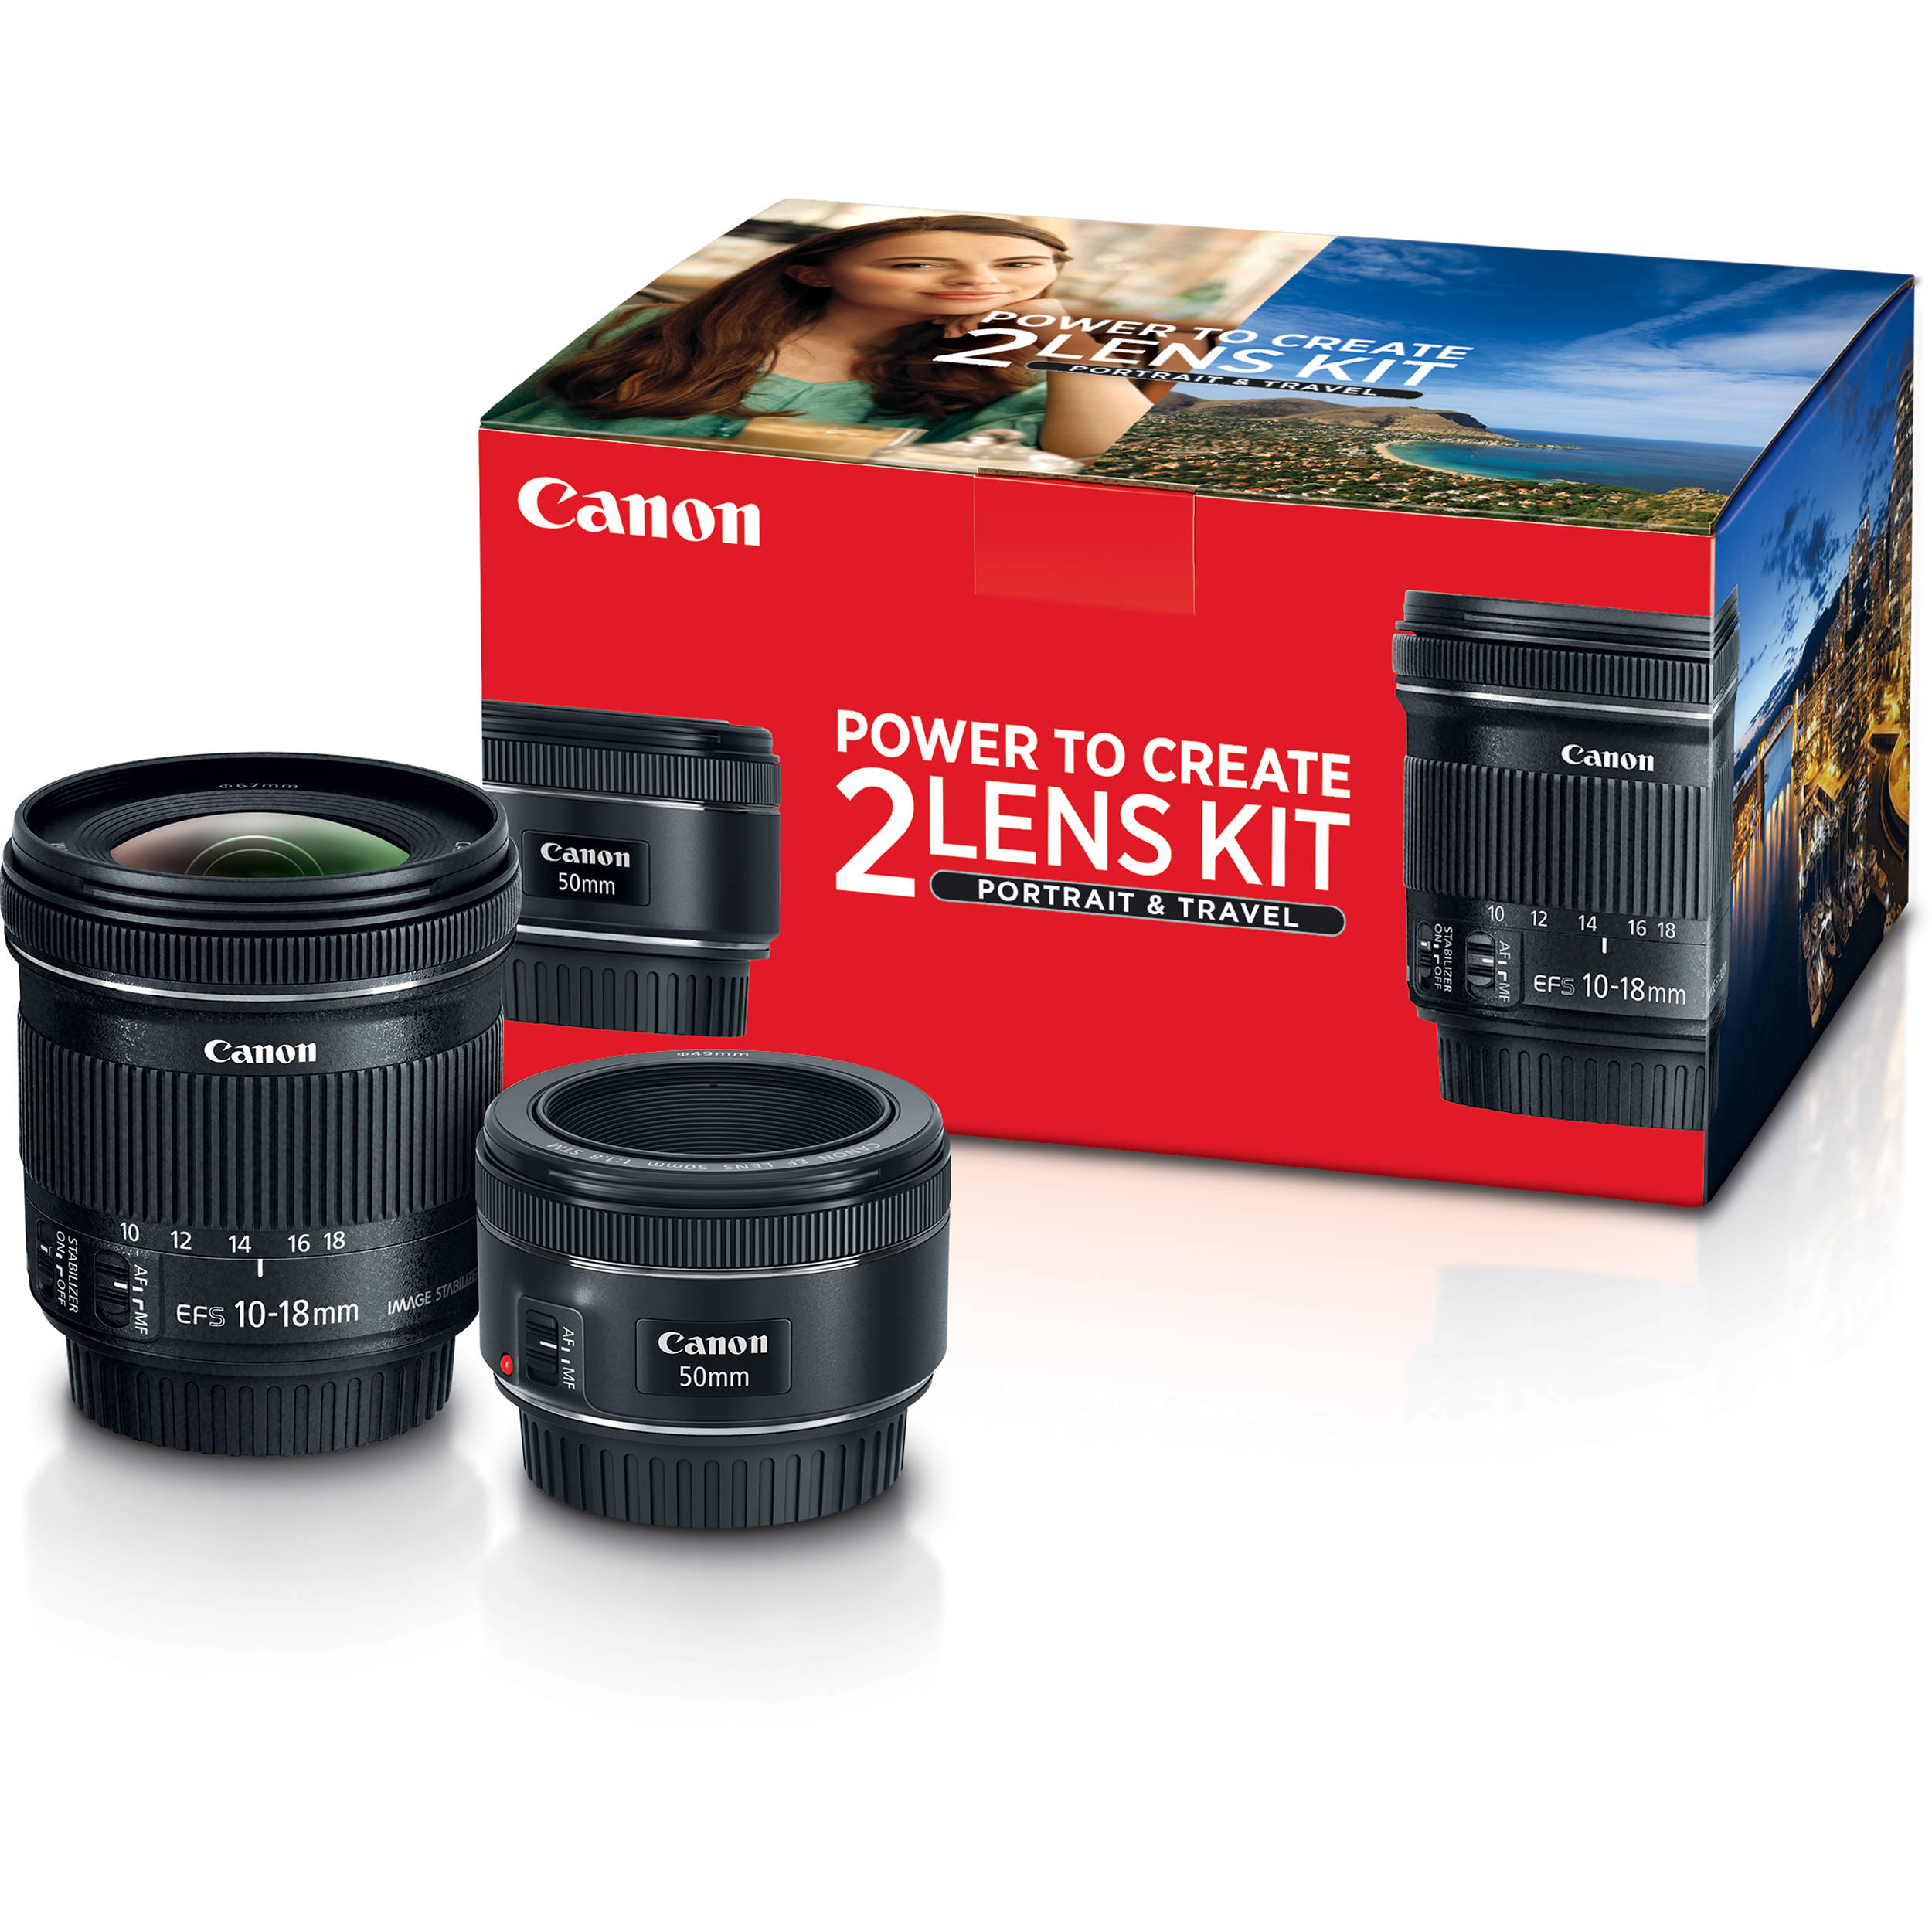 Canon Portrait Travel 2 Lens Kit with 50mm f/1.8 and